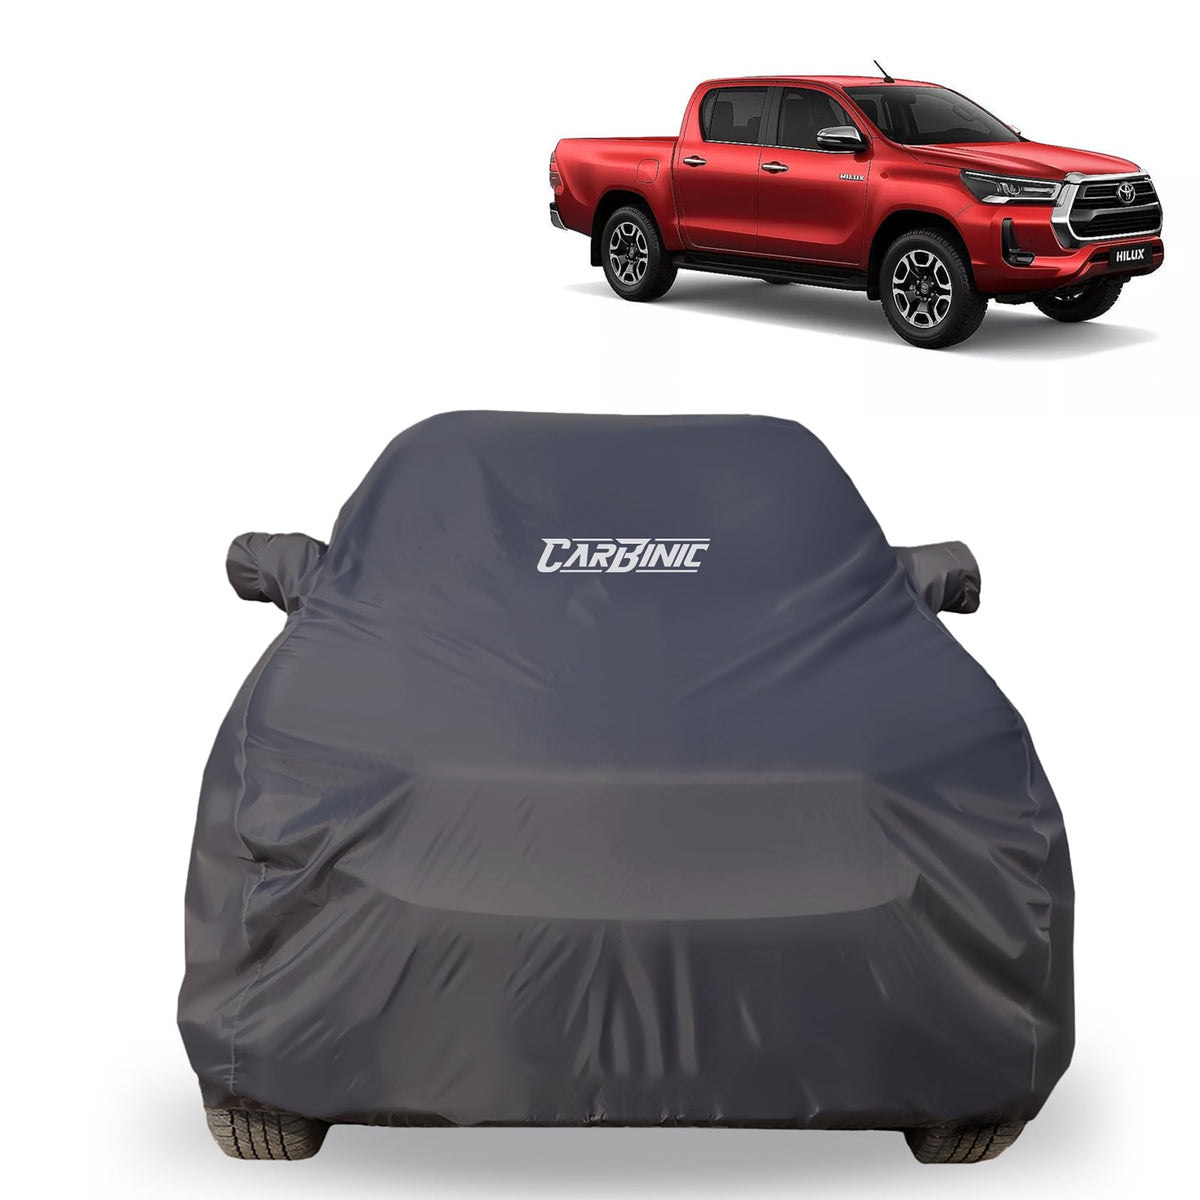 CARBINIC Car Body Cover for Maruti Suzuki XL6 2019 | Water Resistant, UV Protection Car Cover | Scratchproof Body Shield | All-Weather Cover | Mirror Pocket & Antenna | Car Accessories Dusk Grey